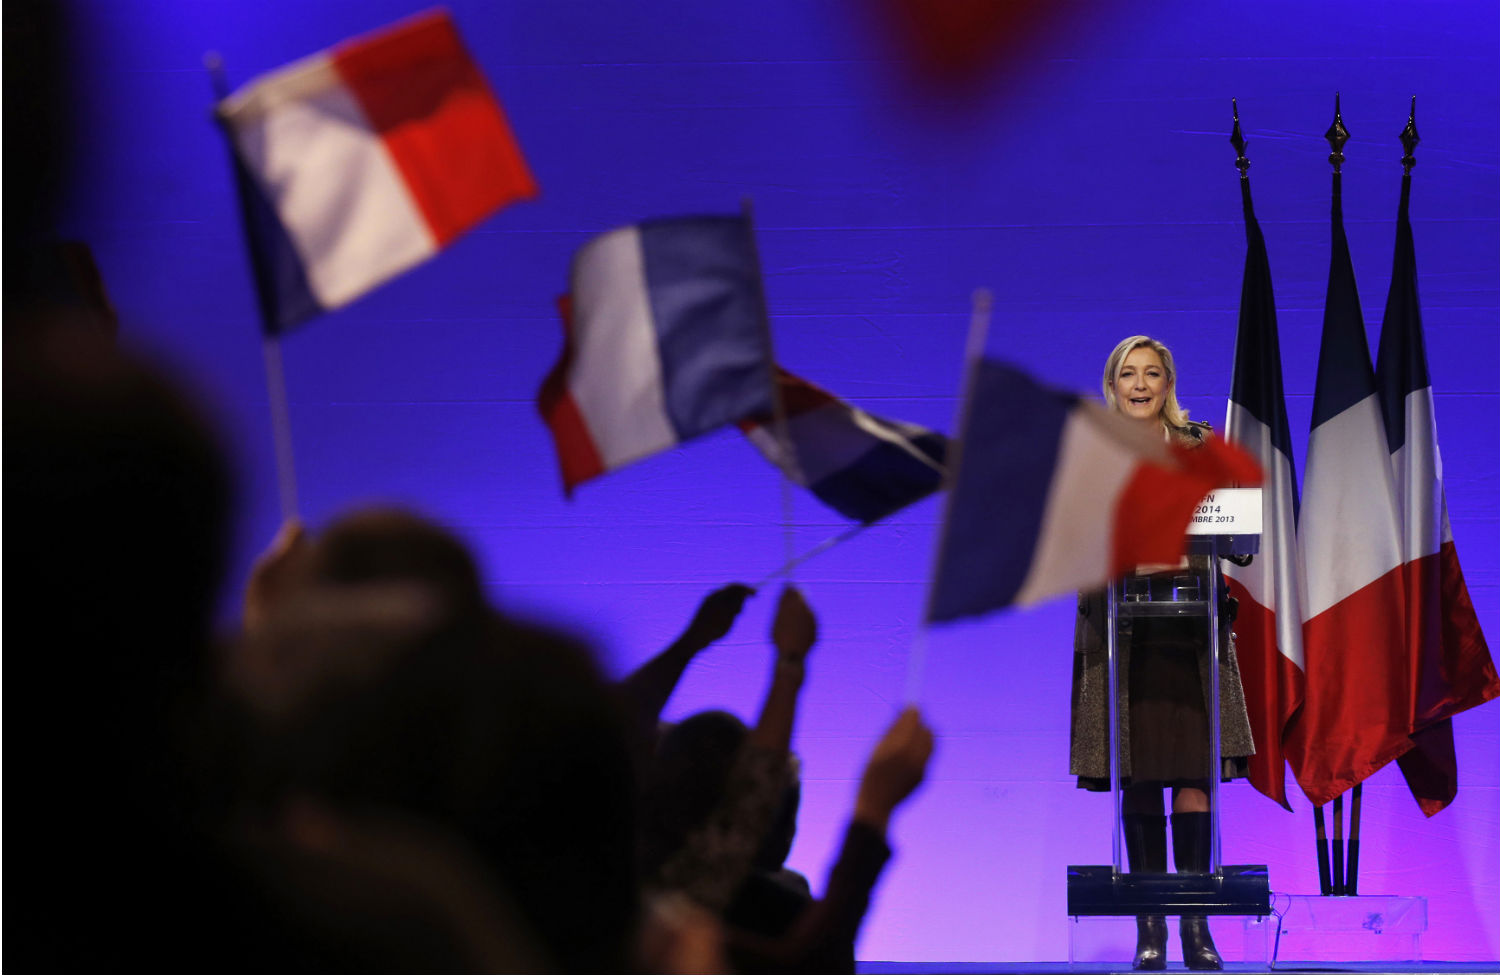 How a Far-Right, Anti-Immigrant Party Became France’s ‘New Normal’